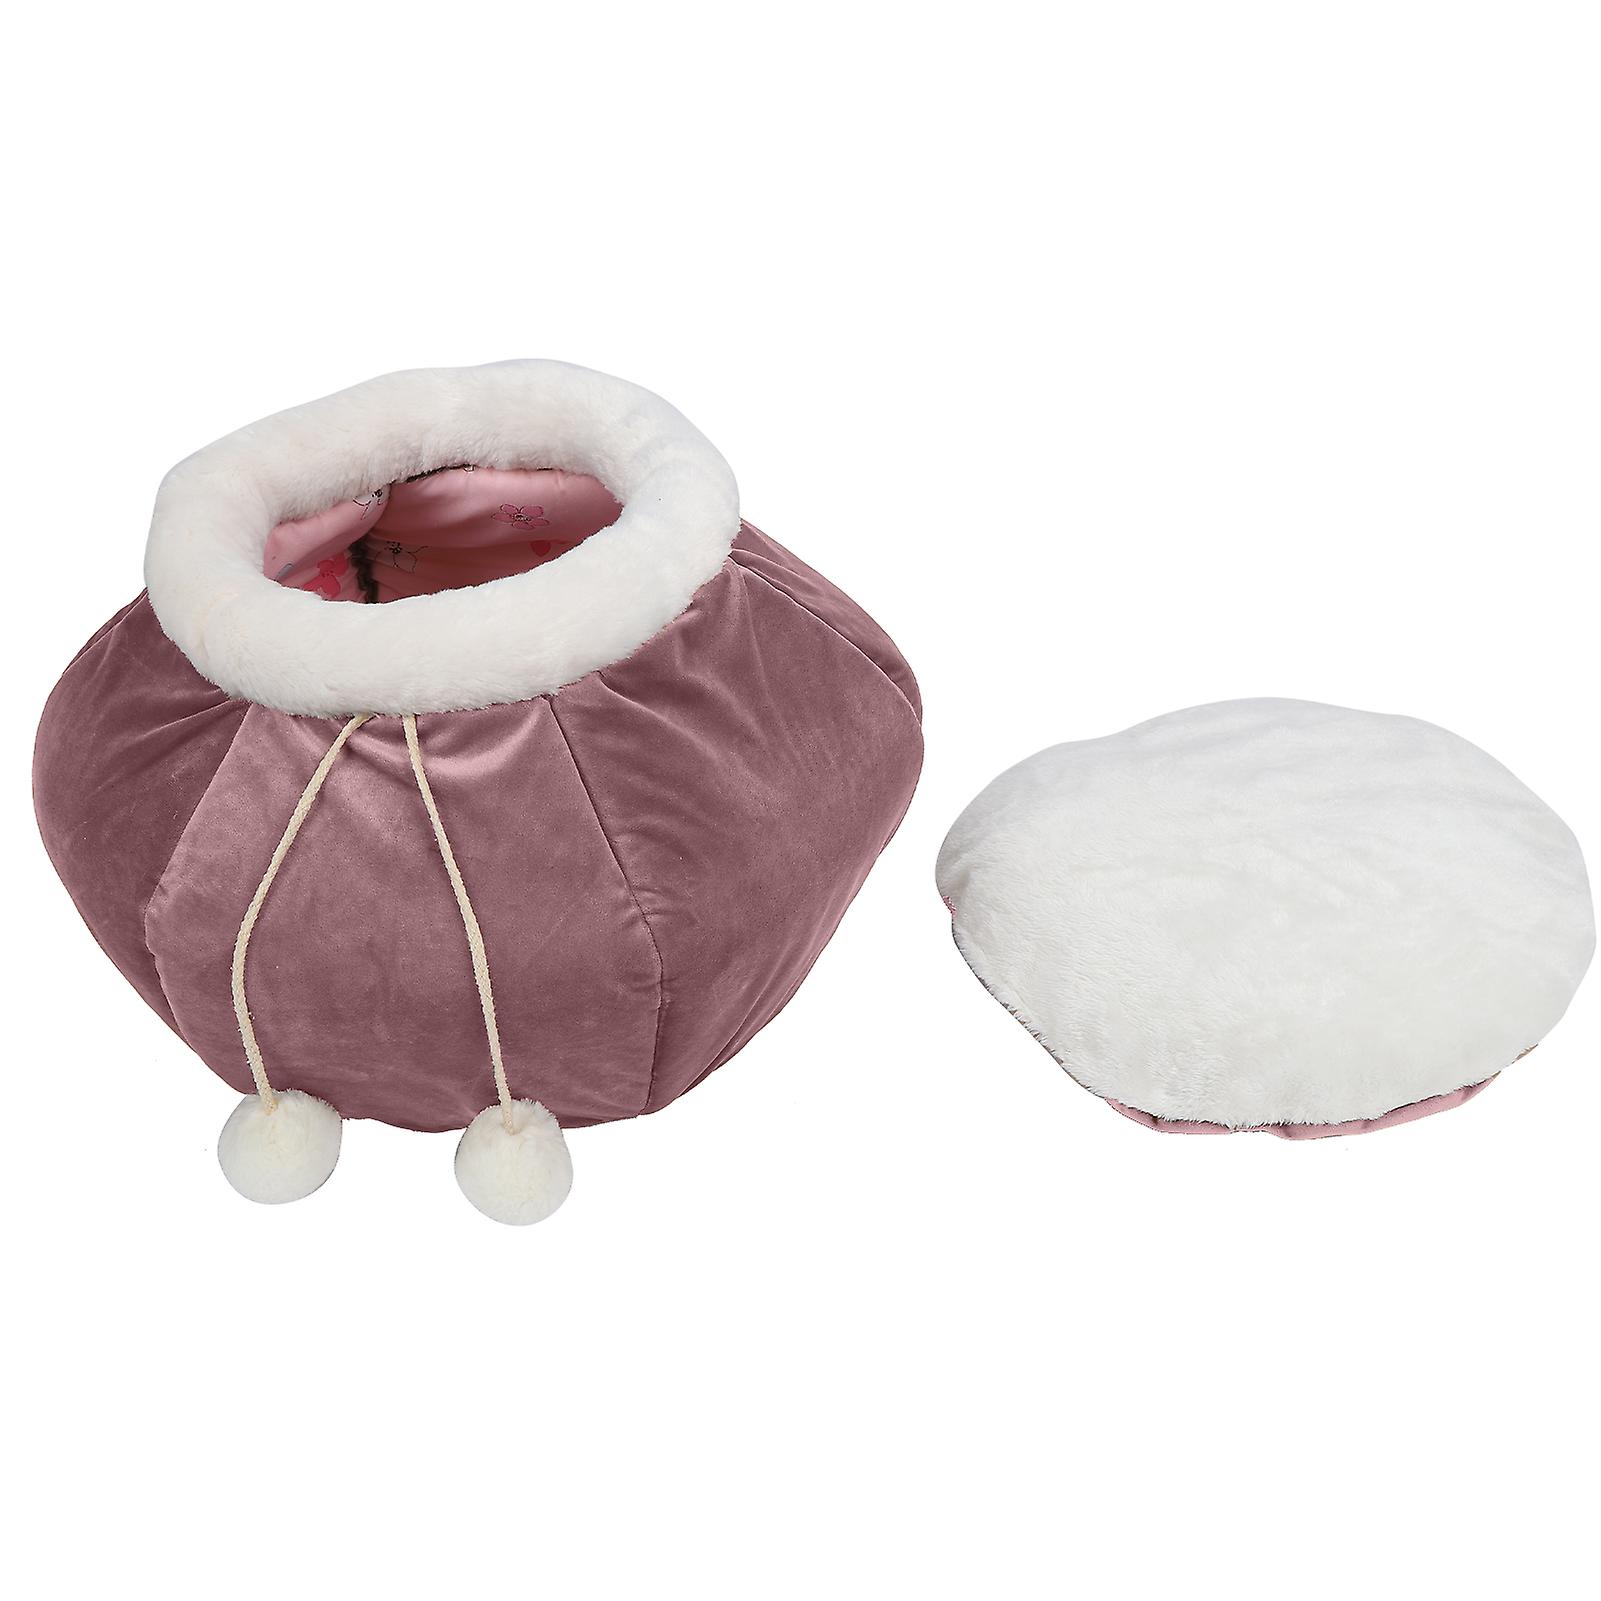 Pet Fish Basket Shape Sleeping Bed Collapsible Warm Soft Punny Resting Bed Pet Suppliespink Purple